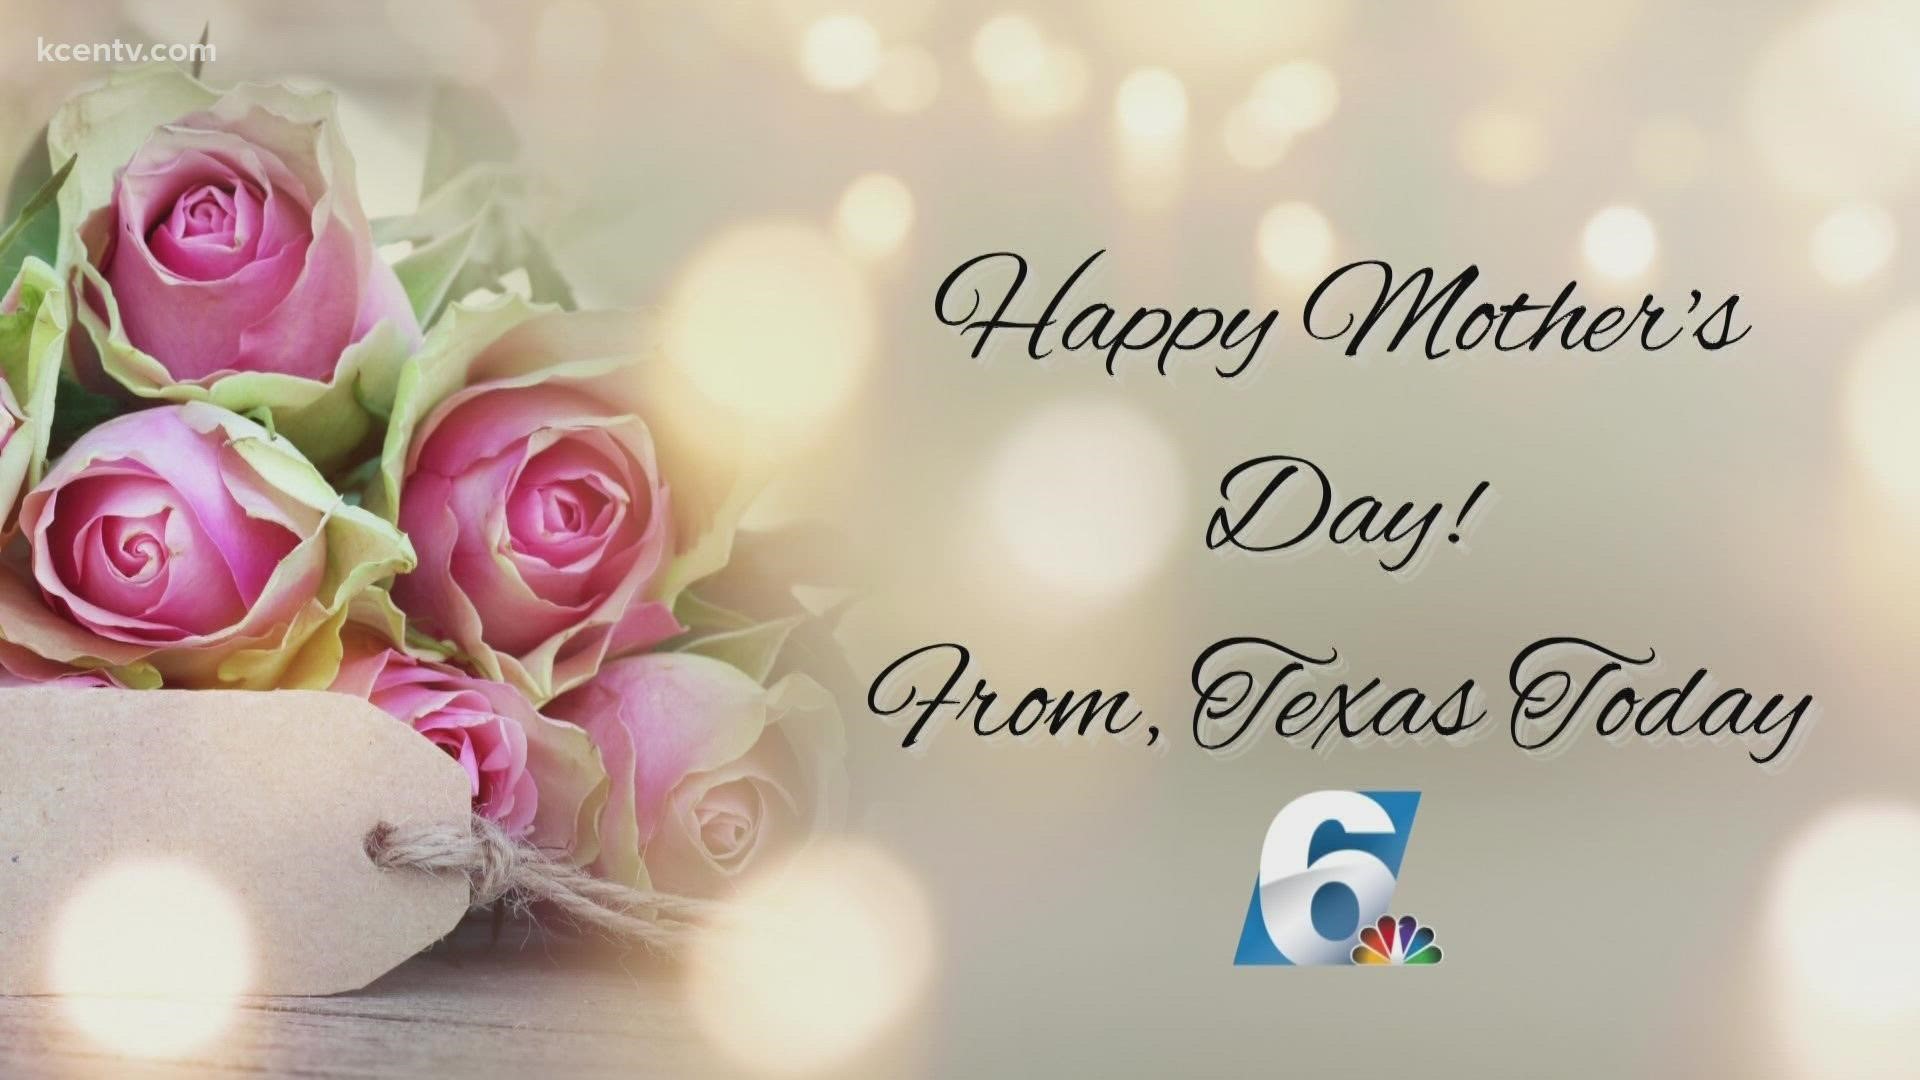 The KCEN family wishes moms all over Central Texas a Happy Mother's Day!